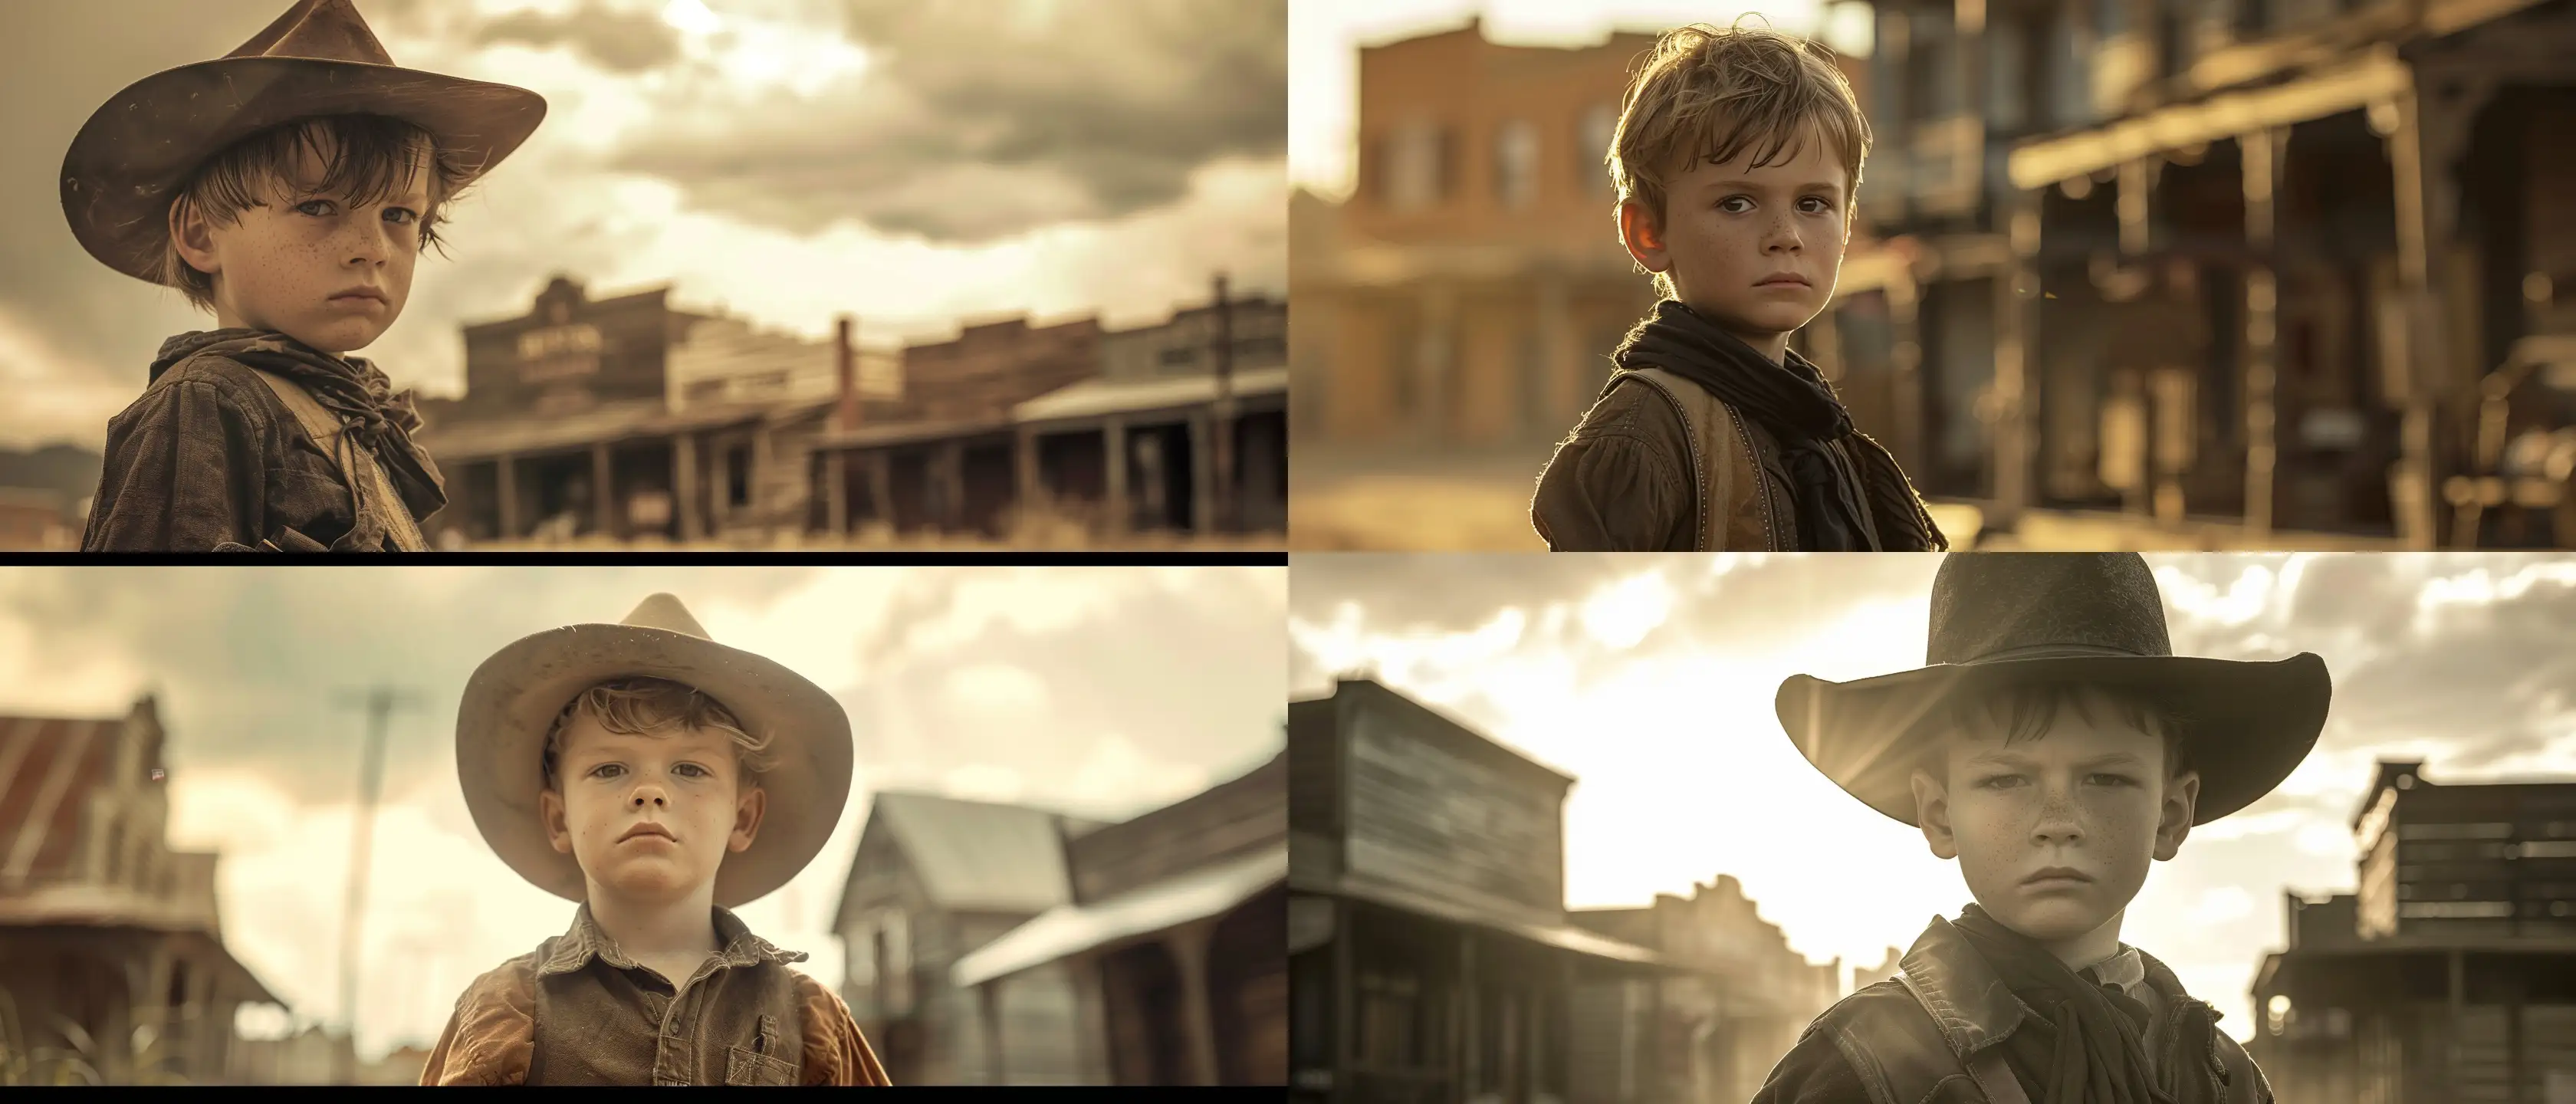 Cinematic-Portrait-of-a-Young-Gunslinger-in-1880s-Western-Town-under-Overcast-Diffused-Sunlight